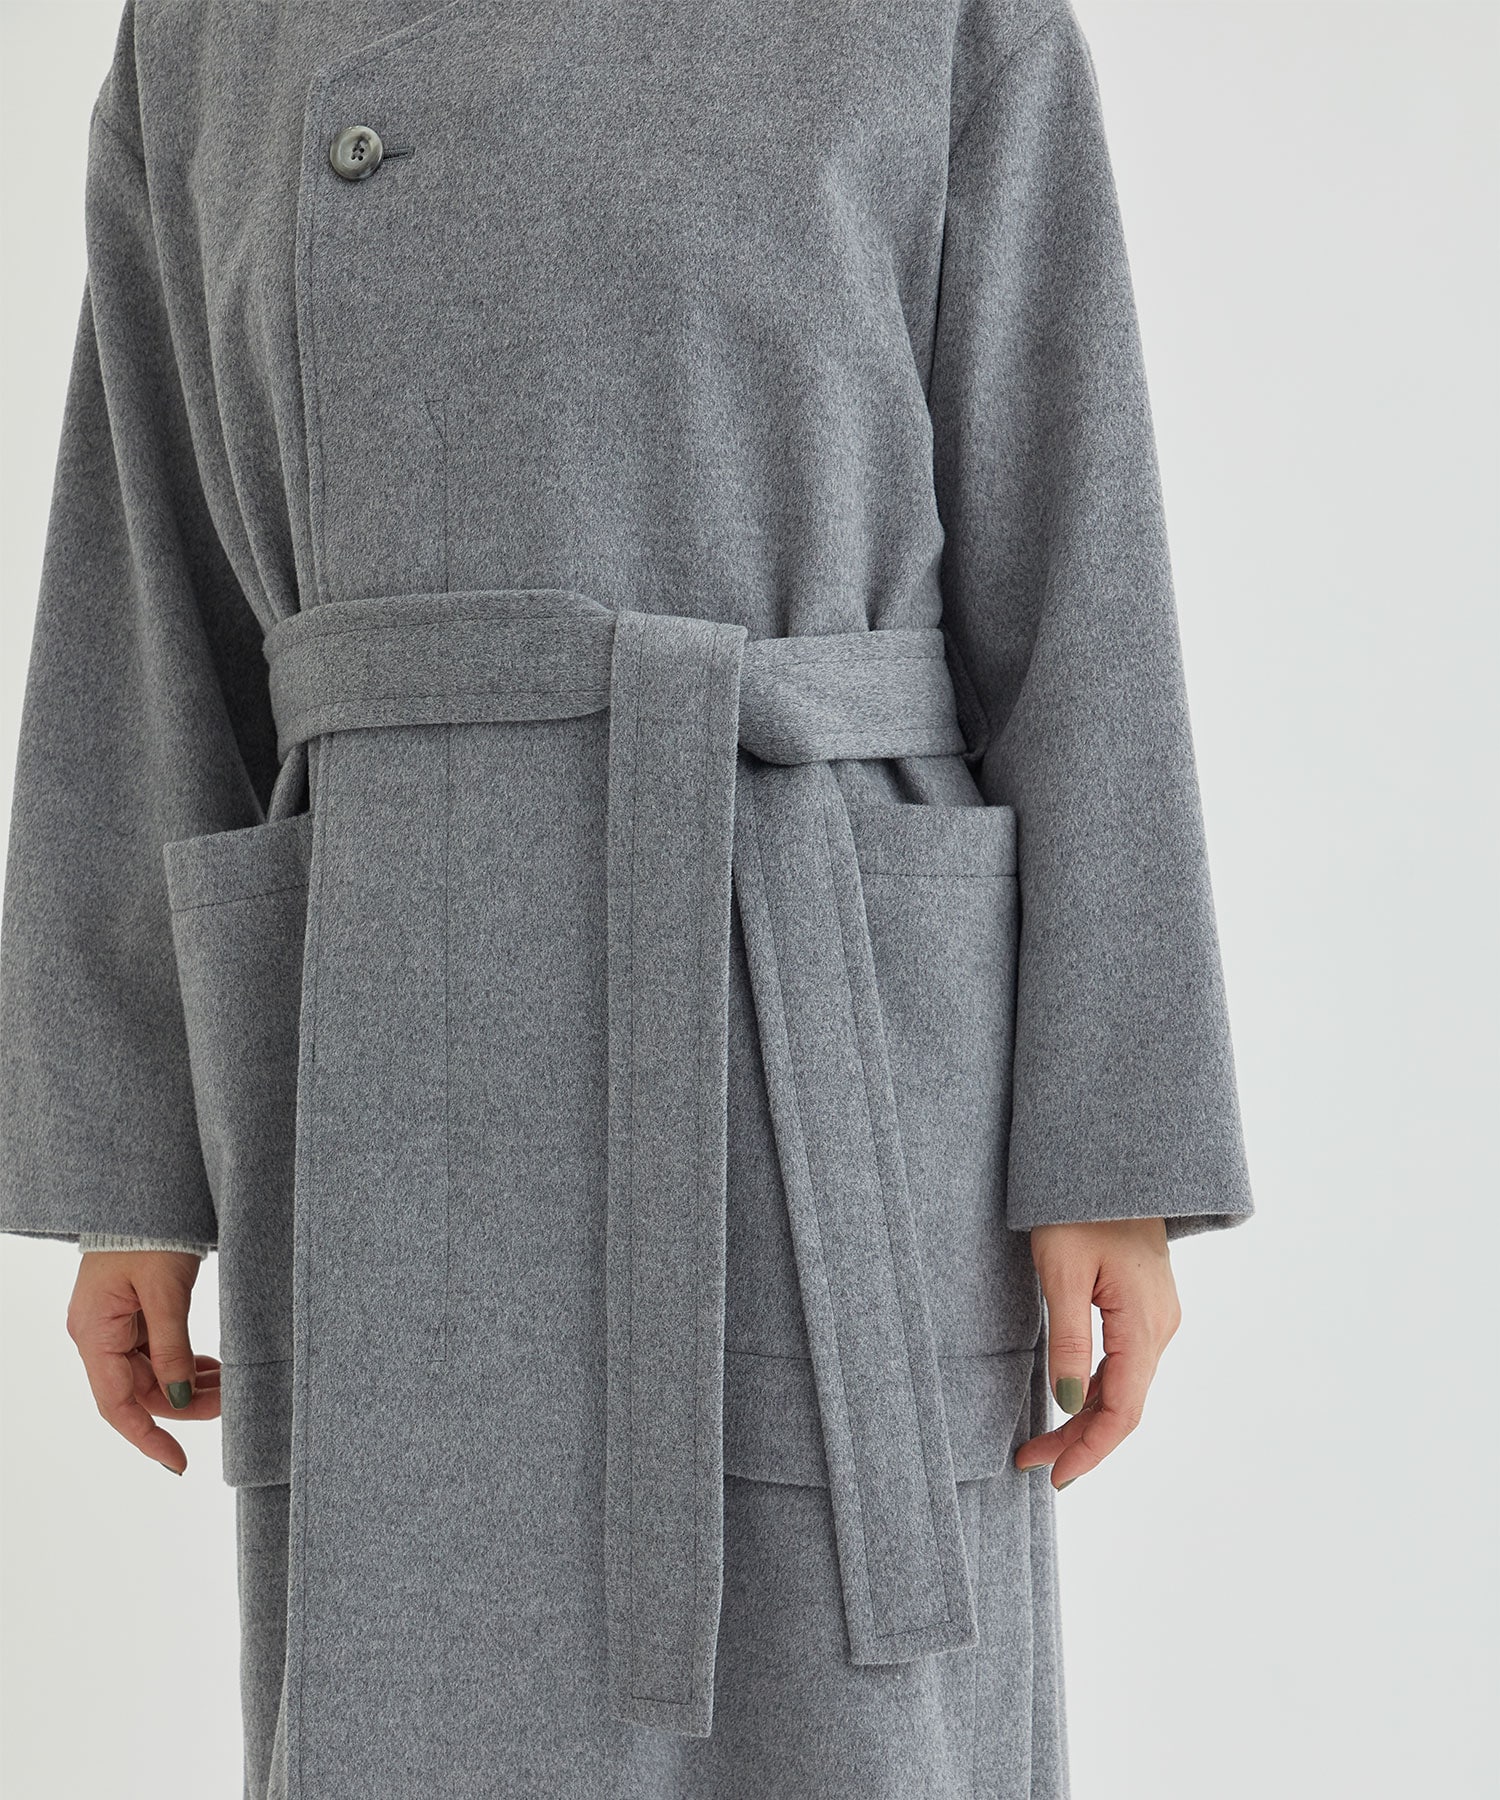 belted no collar wool coat THE PERMANENT EYE